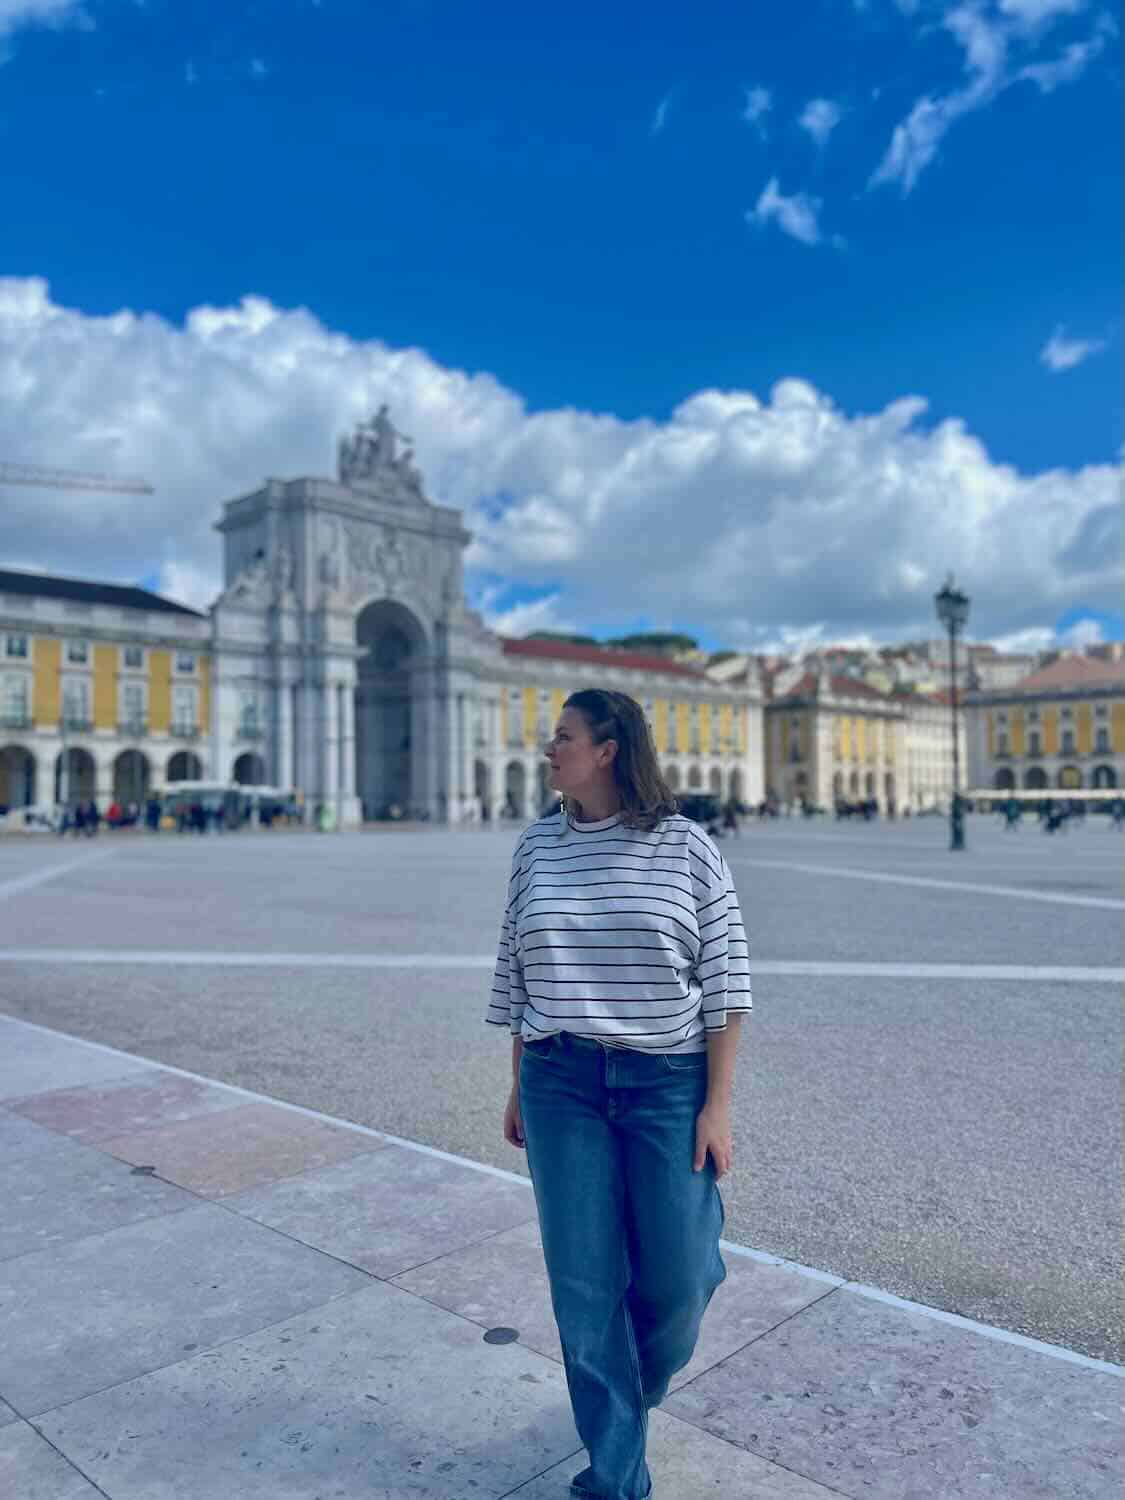 A woman strolling in front of Lisbon's expansive Praça do Comércio with the notable Rua Augusta Arch, under a sky with fluffy clouds